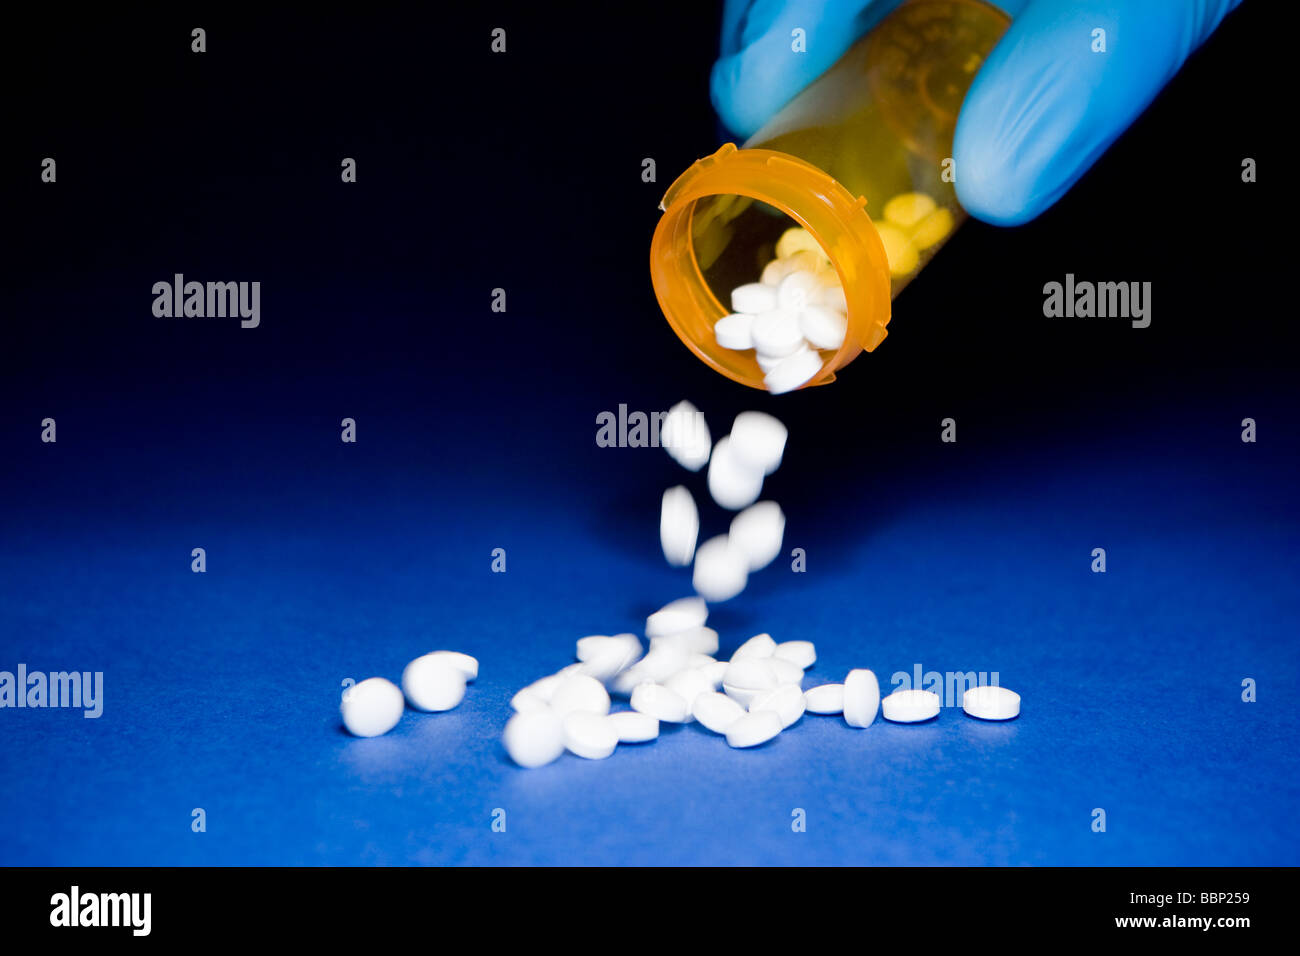 Close-up of a hand in a blue surgical glove emptying an orange prescription bottle of white pills Stock Photo